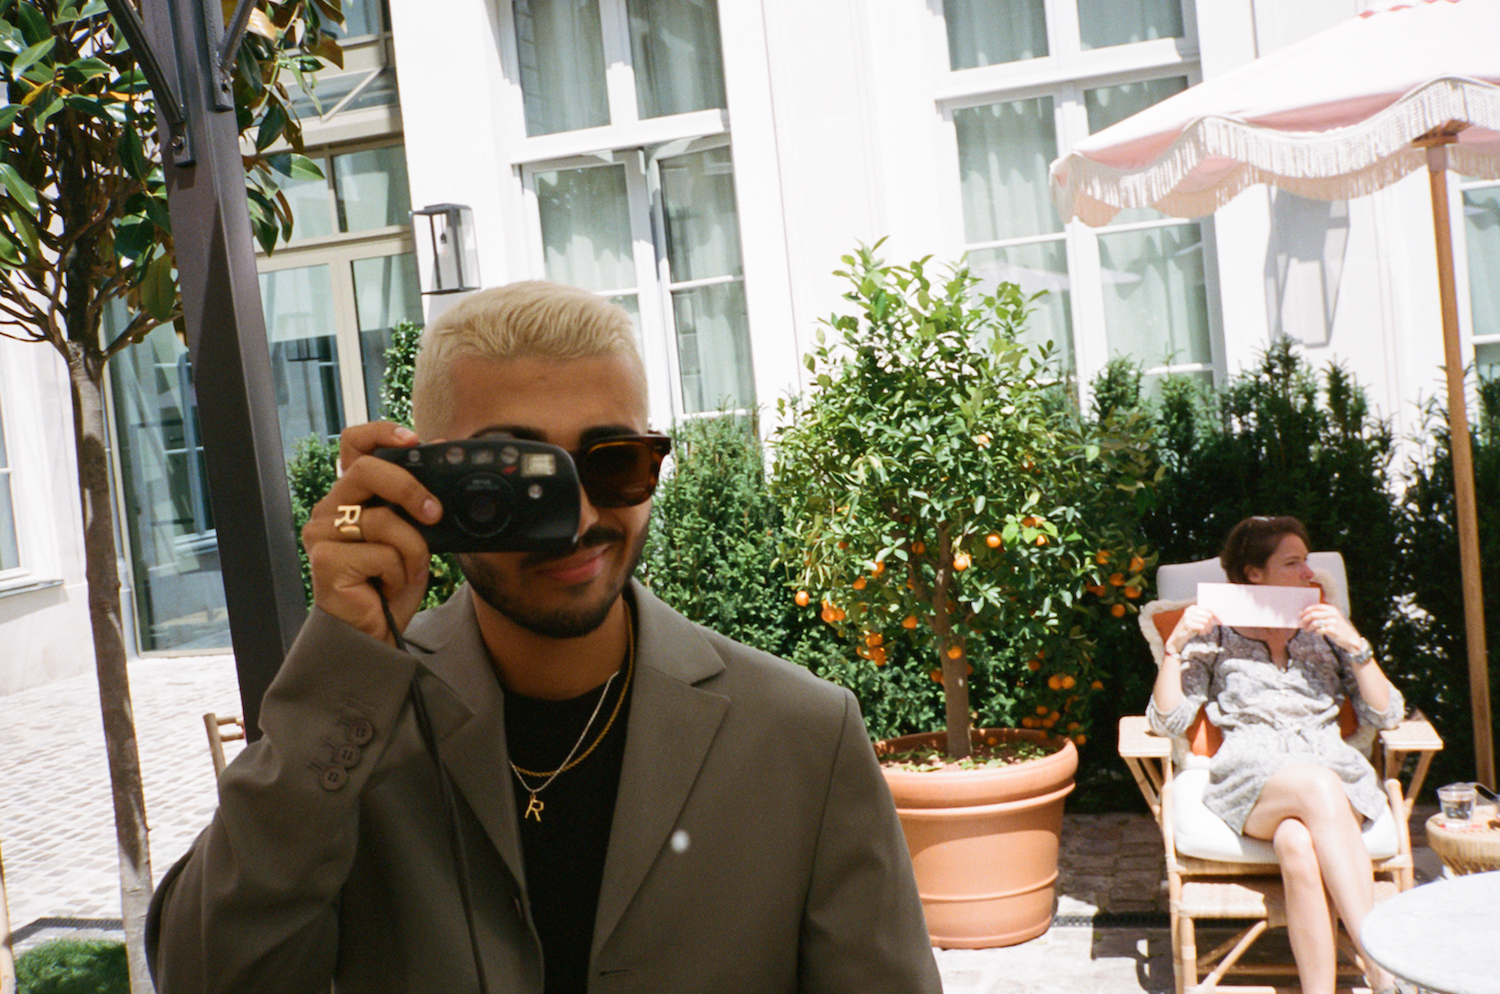 More from PAUSE’s Influencer Brunch at La Riviera Shot by @andrewgeorgiades